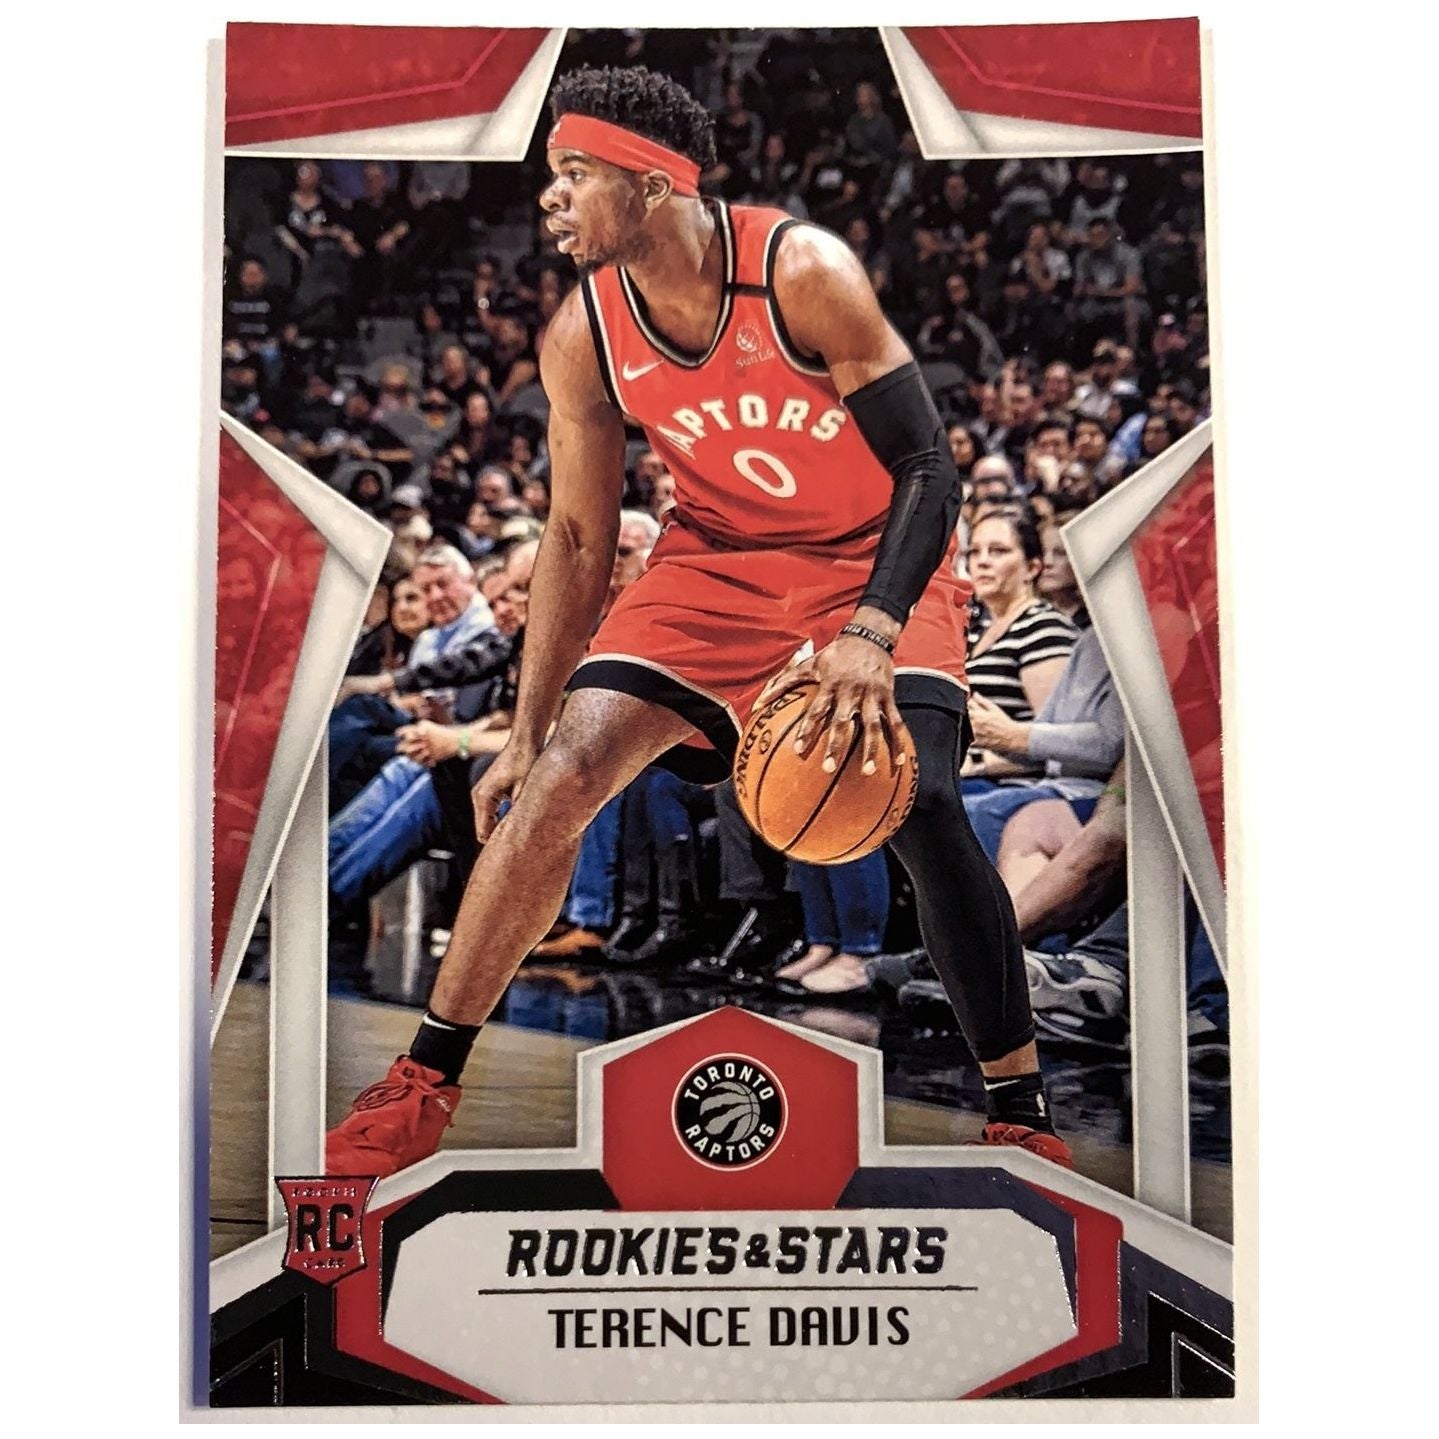  2019-20 Chronicles Terence Davis Rookies and Stars  Local Legends Cards & Collectibles